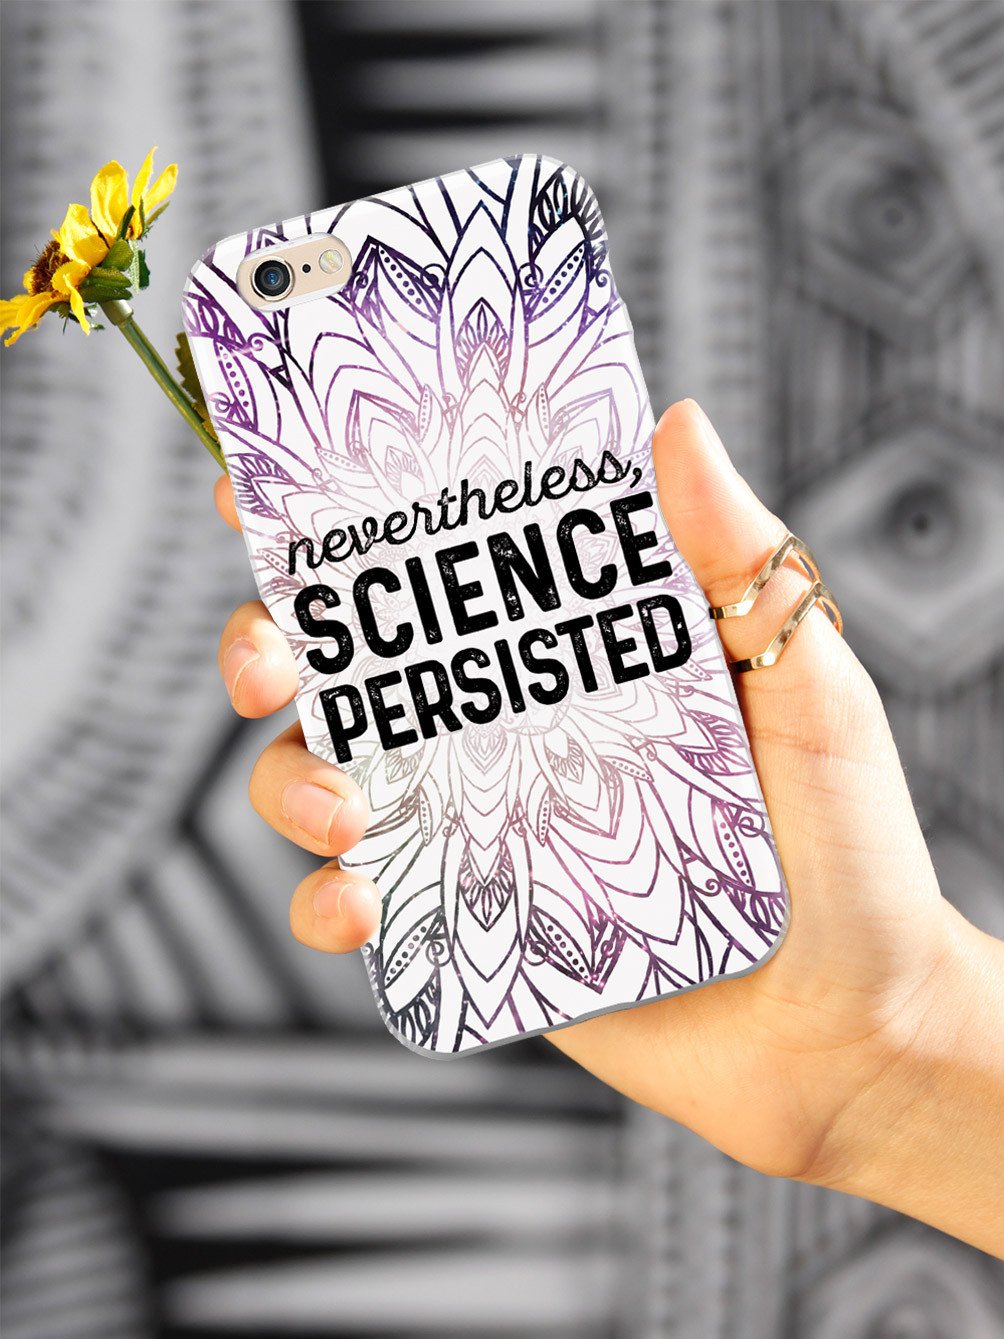 Nevertheless, Science Persisted Case - pipercleo.com